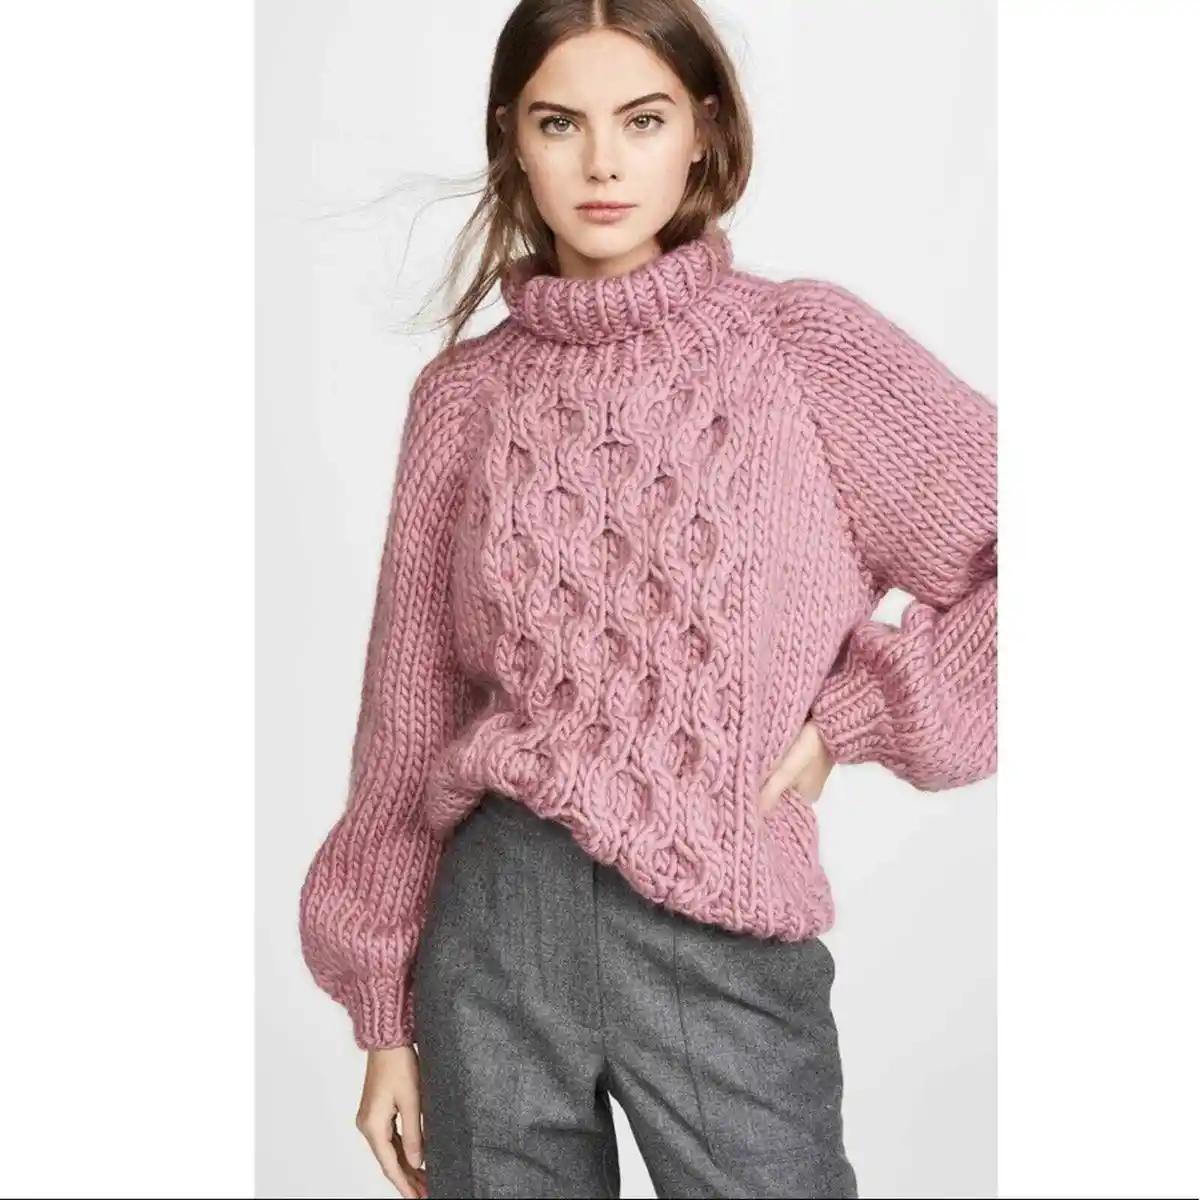 NEW I Love Mr. Mittens Honeycomb High Neck Cable Knit Wool Sweater in Rose